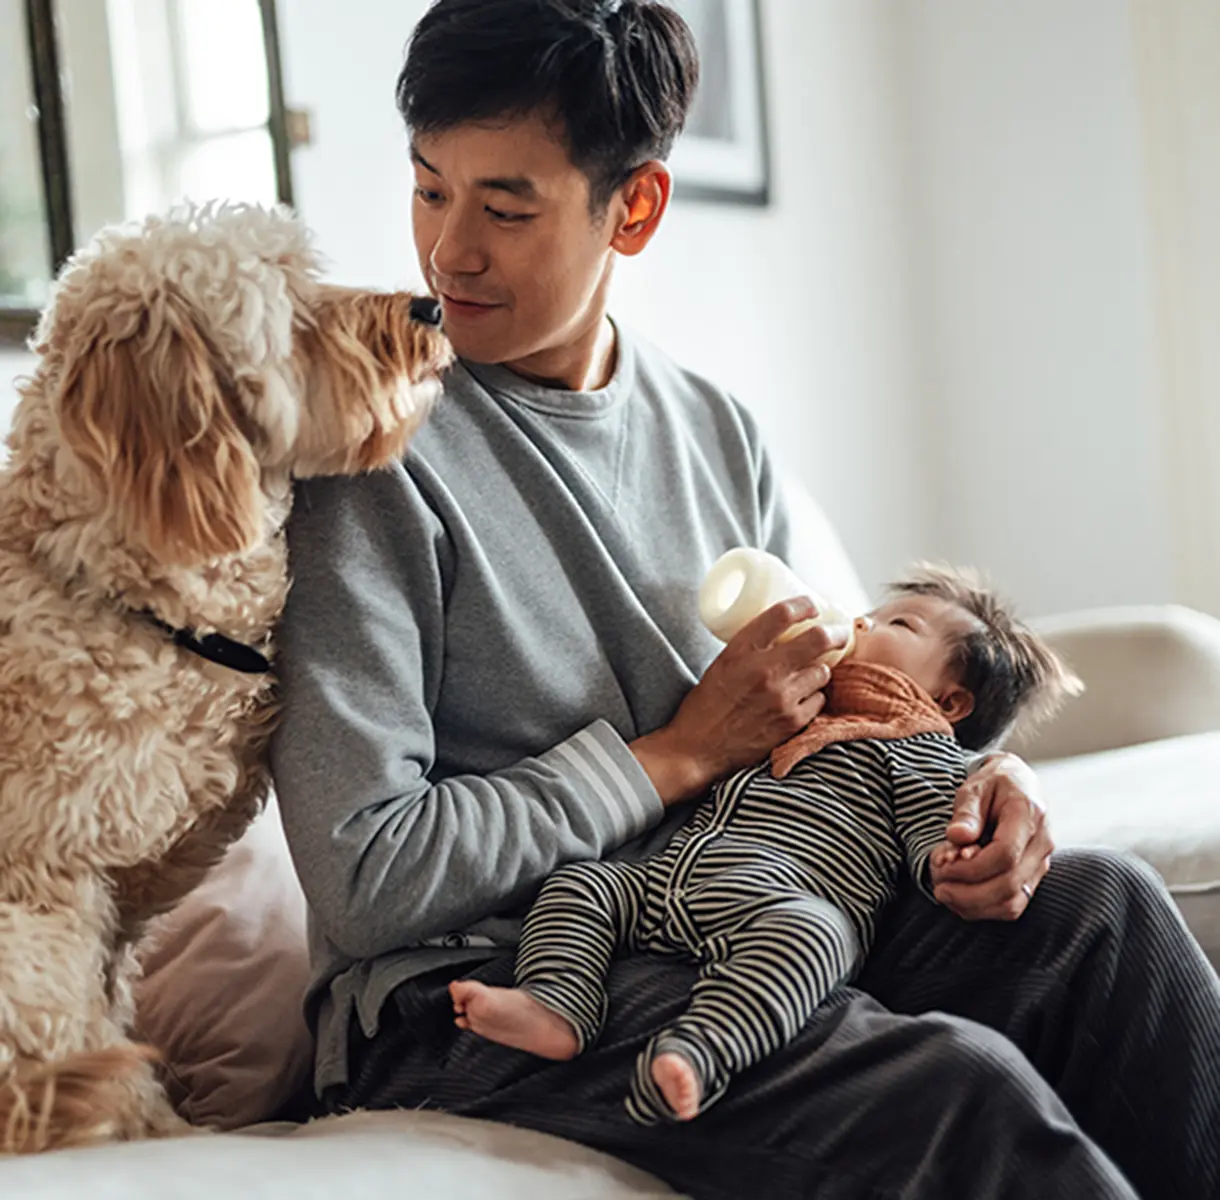 Man feeding baby a bottle while looking at his dog